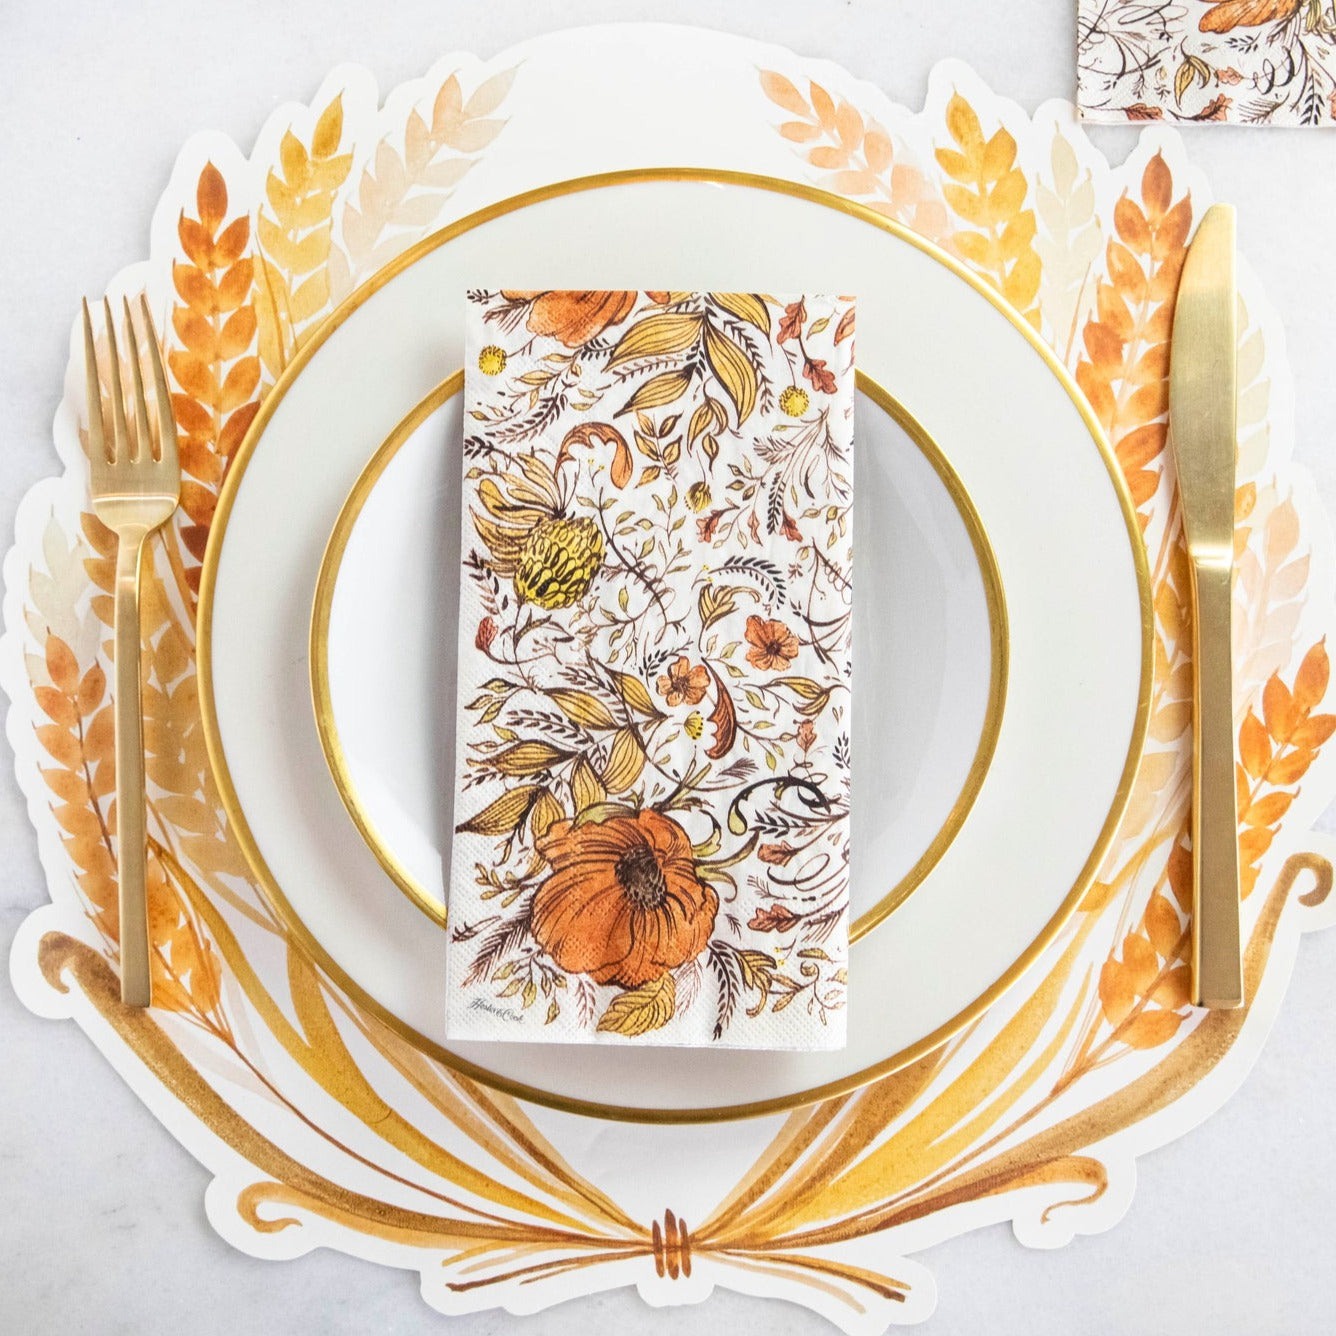 A Hester &amp; Cook Die-cut Golden Harvest Placemat featuring a gold plate, fork, and napkin.